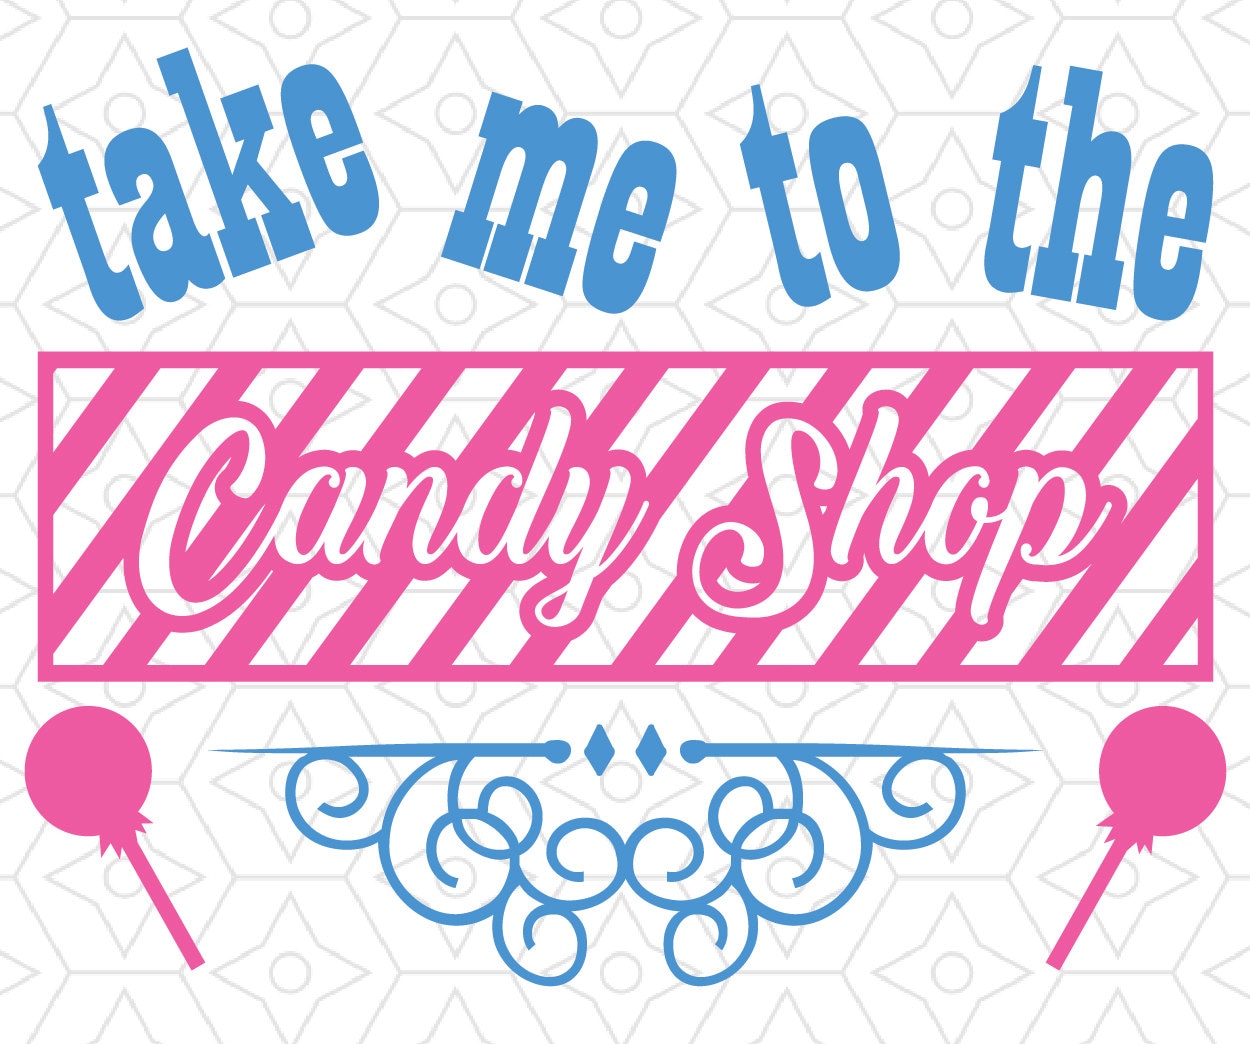 Download Candy Shop Decal Design SVG DXF EPS Vector files for use